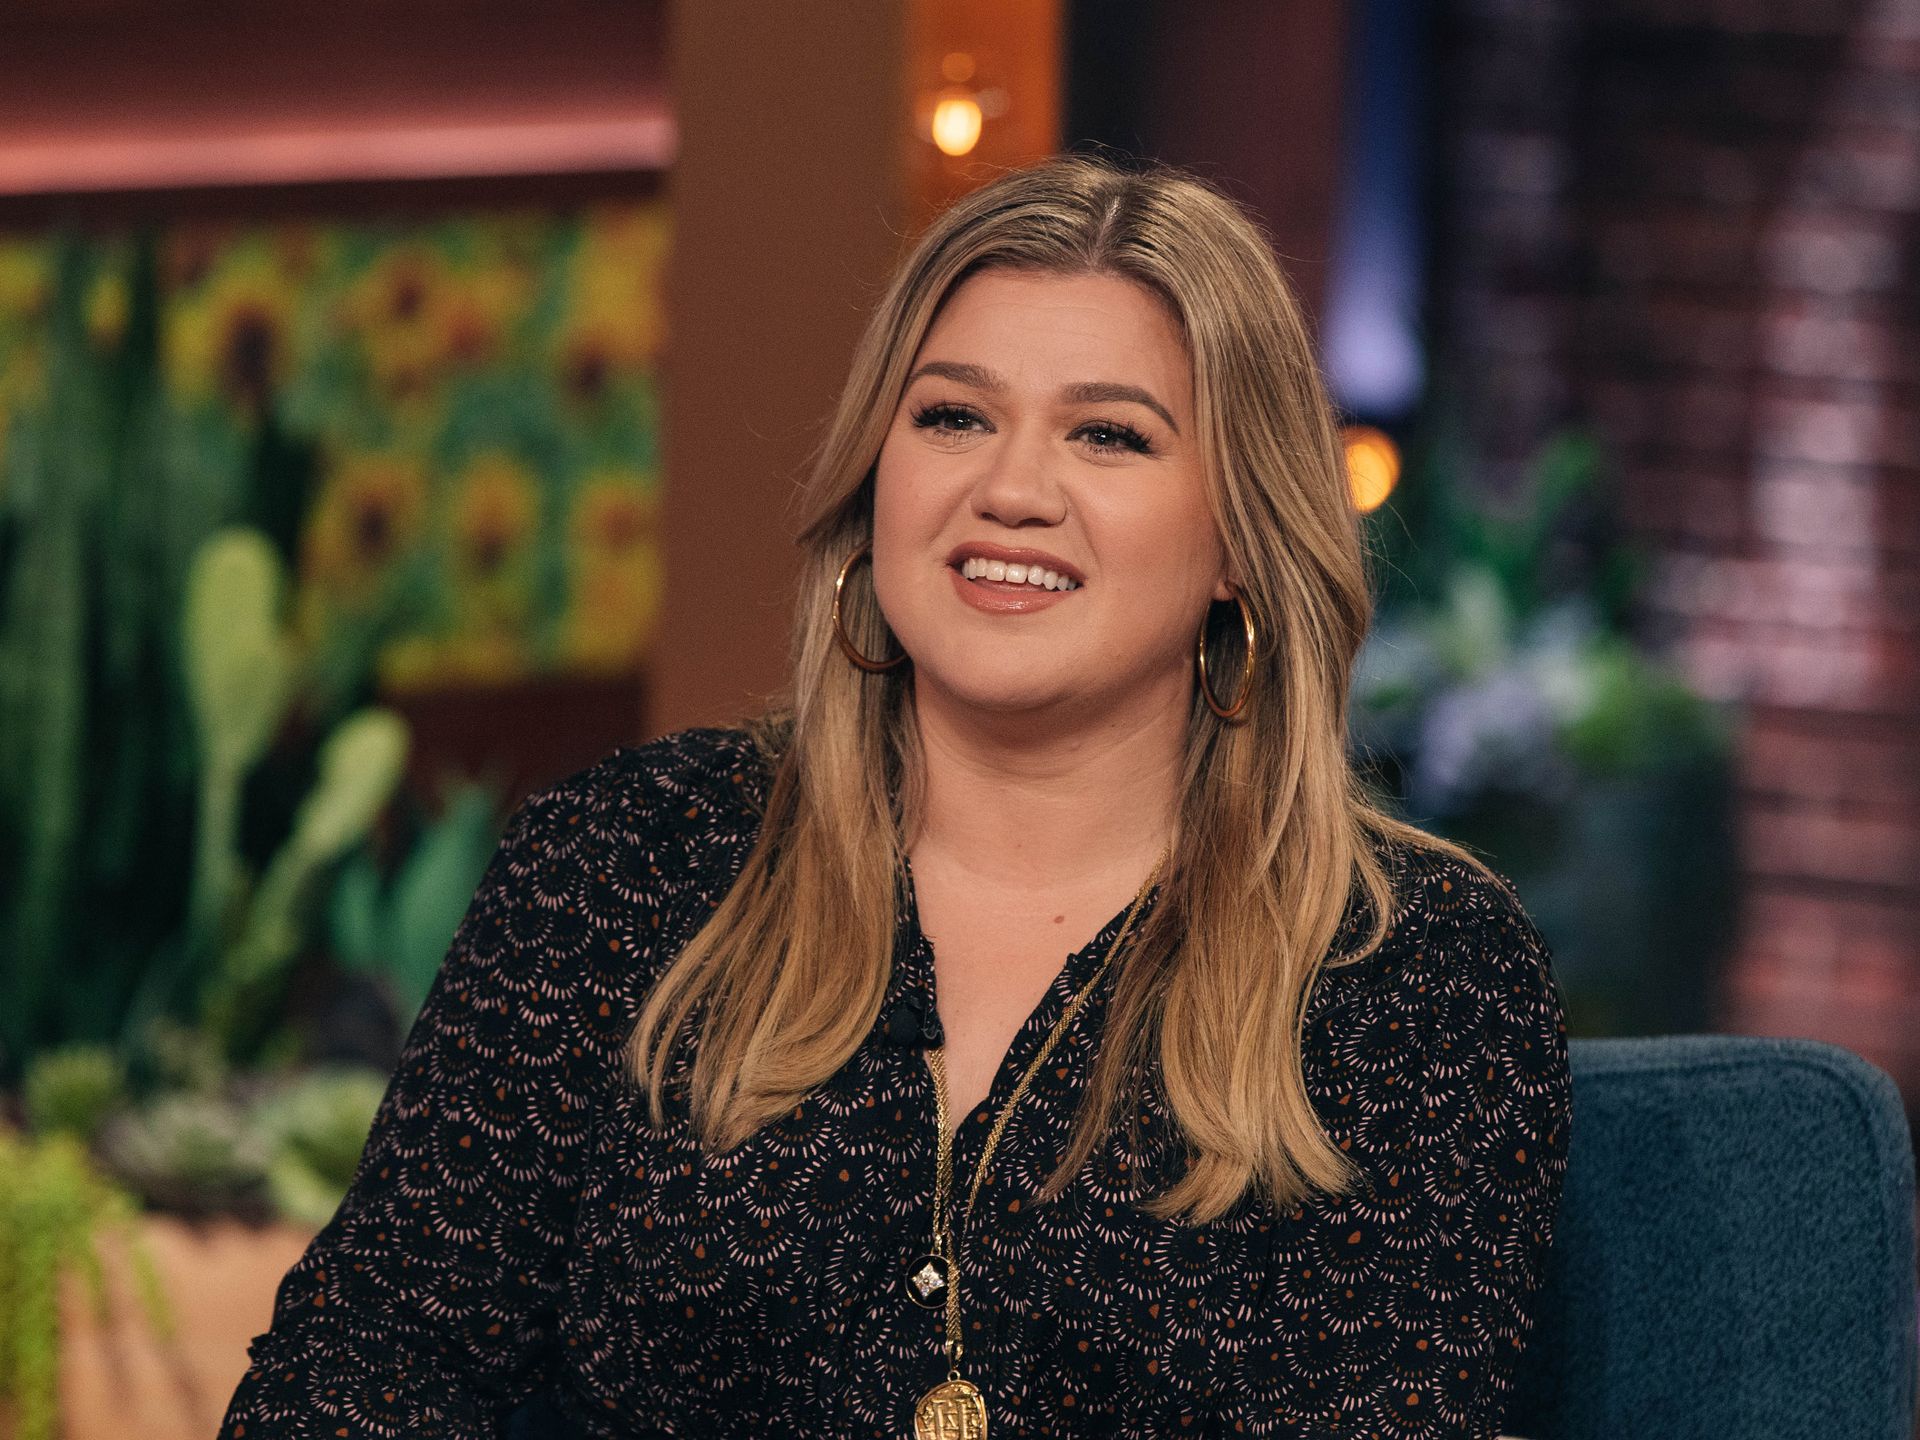 Kelly Clarkson Reveals Three Categories of Guys She Will Not Date, Including 'Great' Males